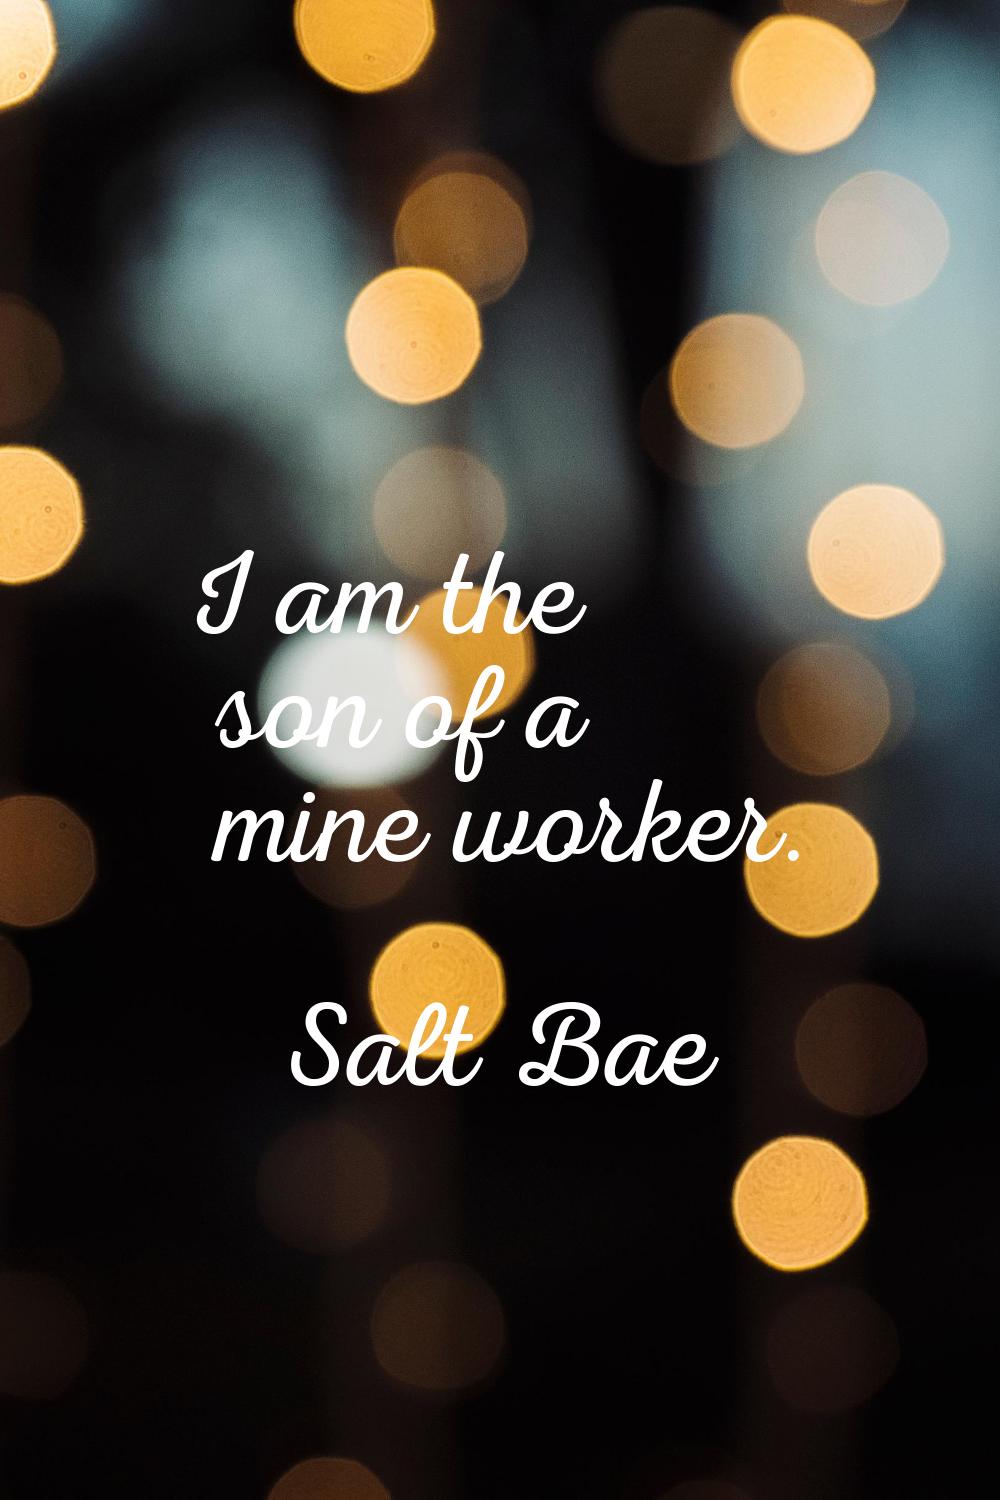 I am the son of a mine worker.